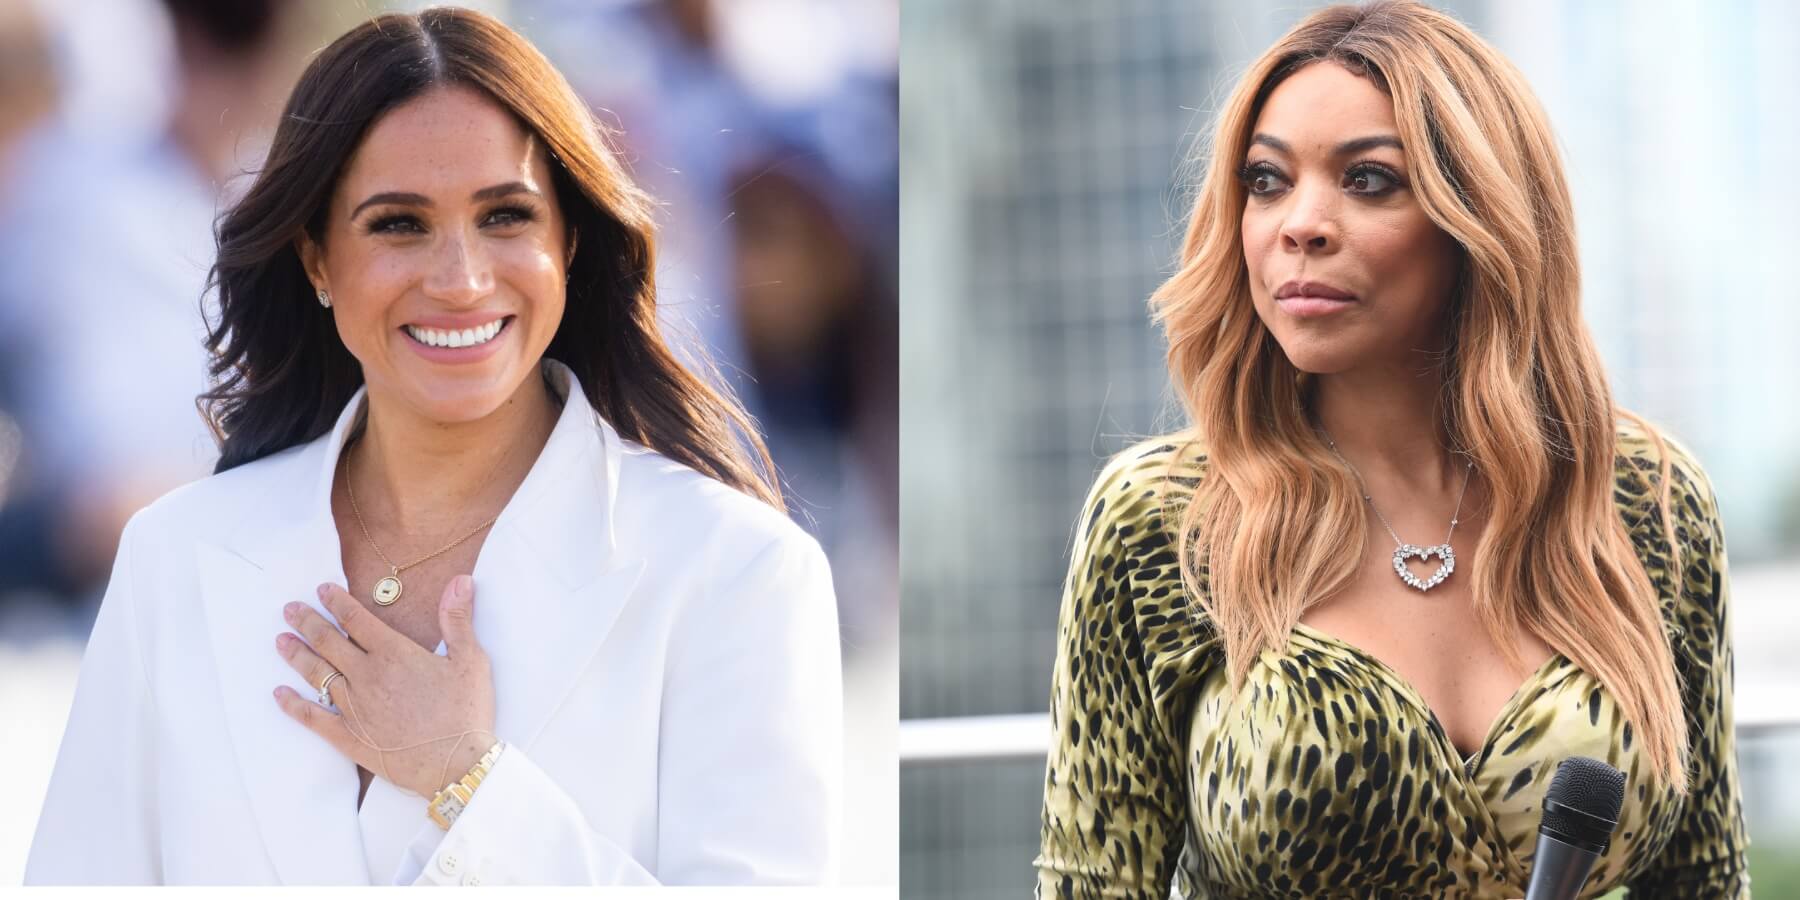 Meghan Markle and Wendy Williams in side-by-side photographs